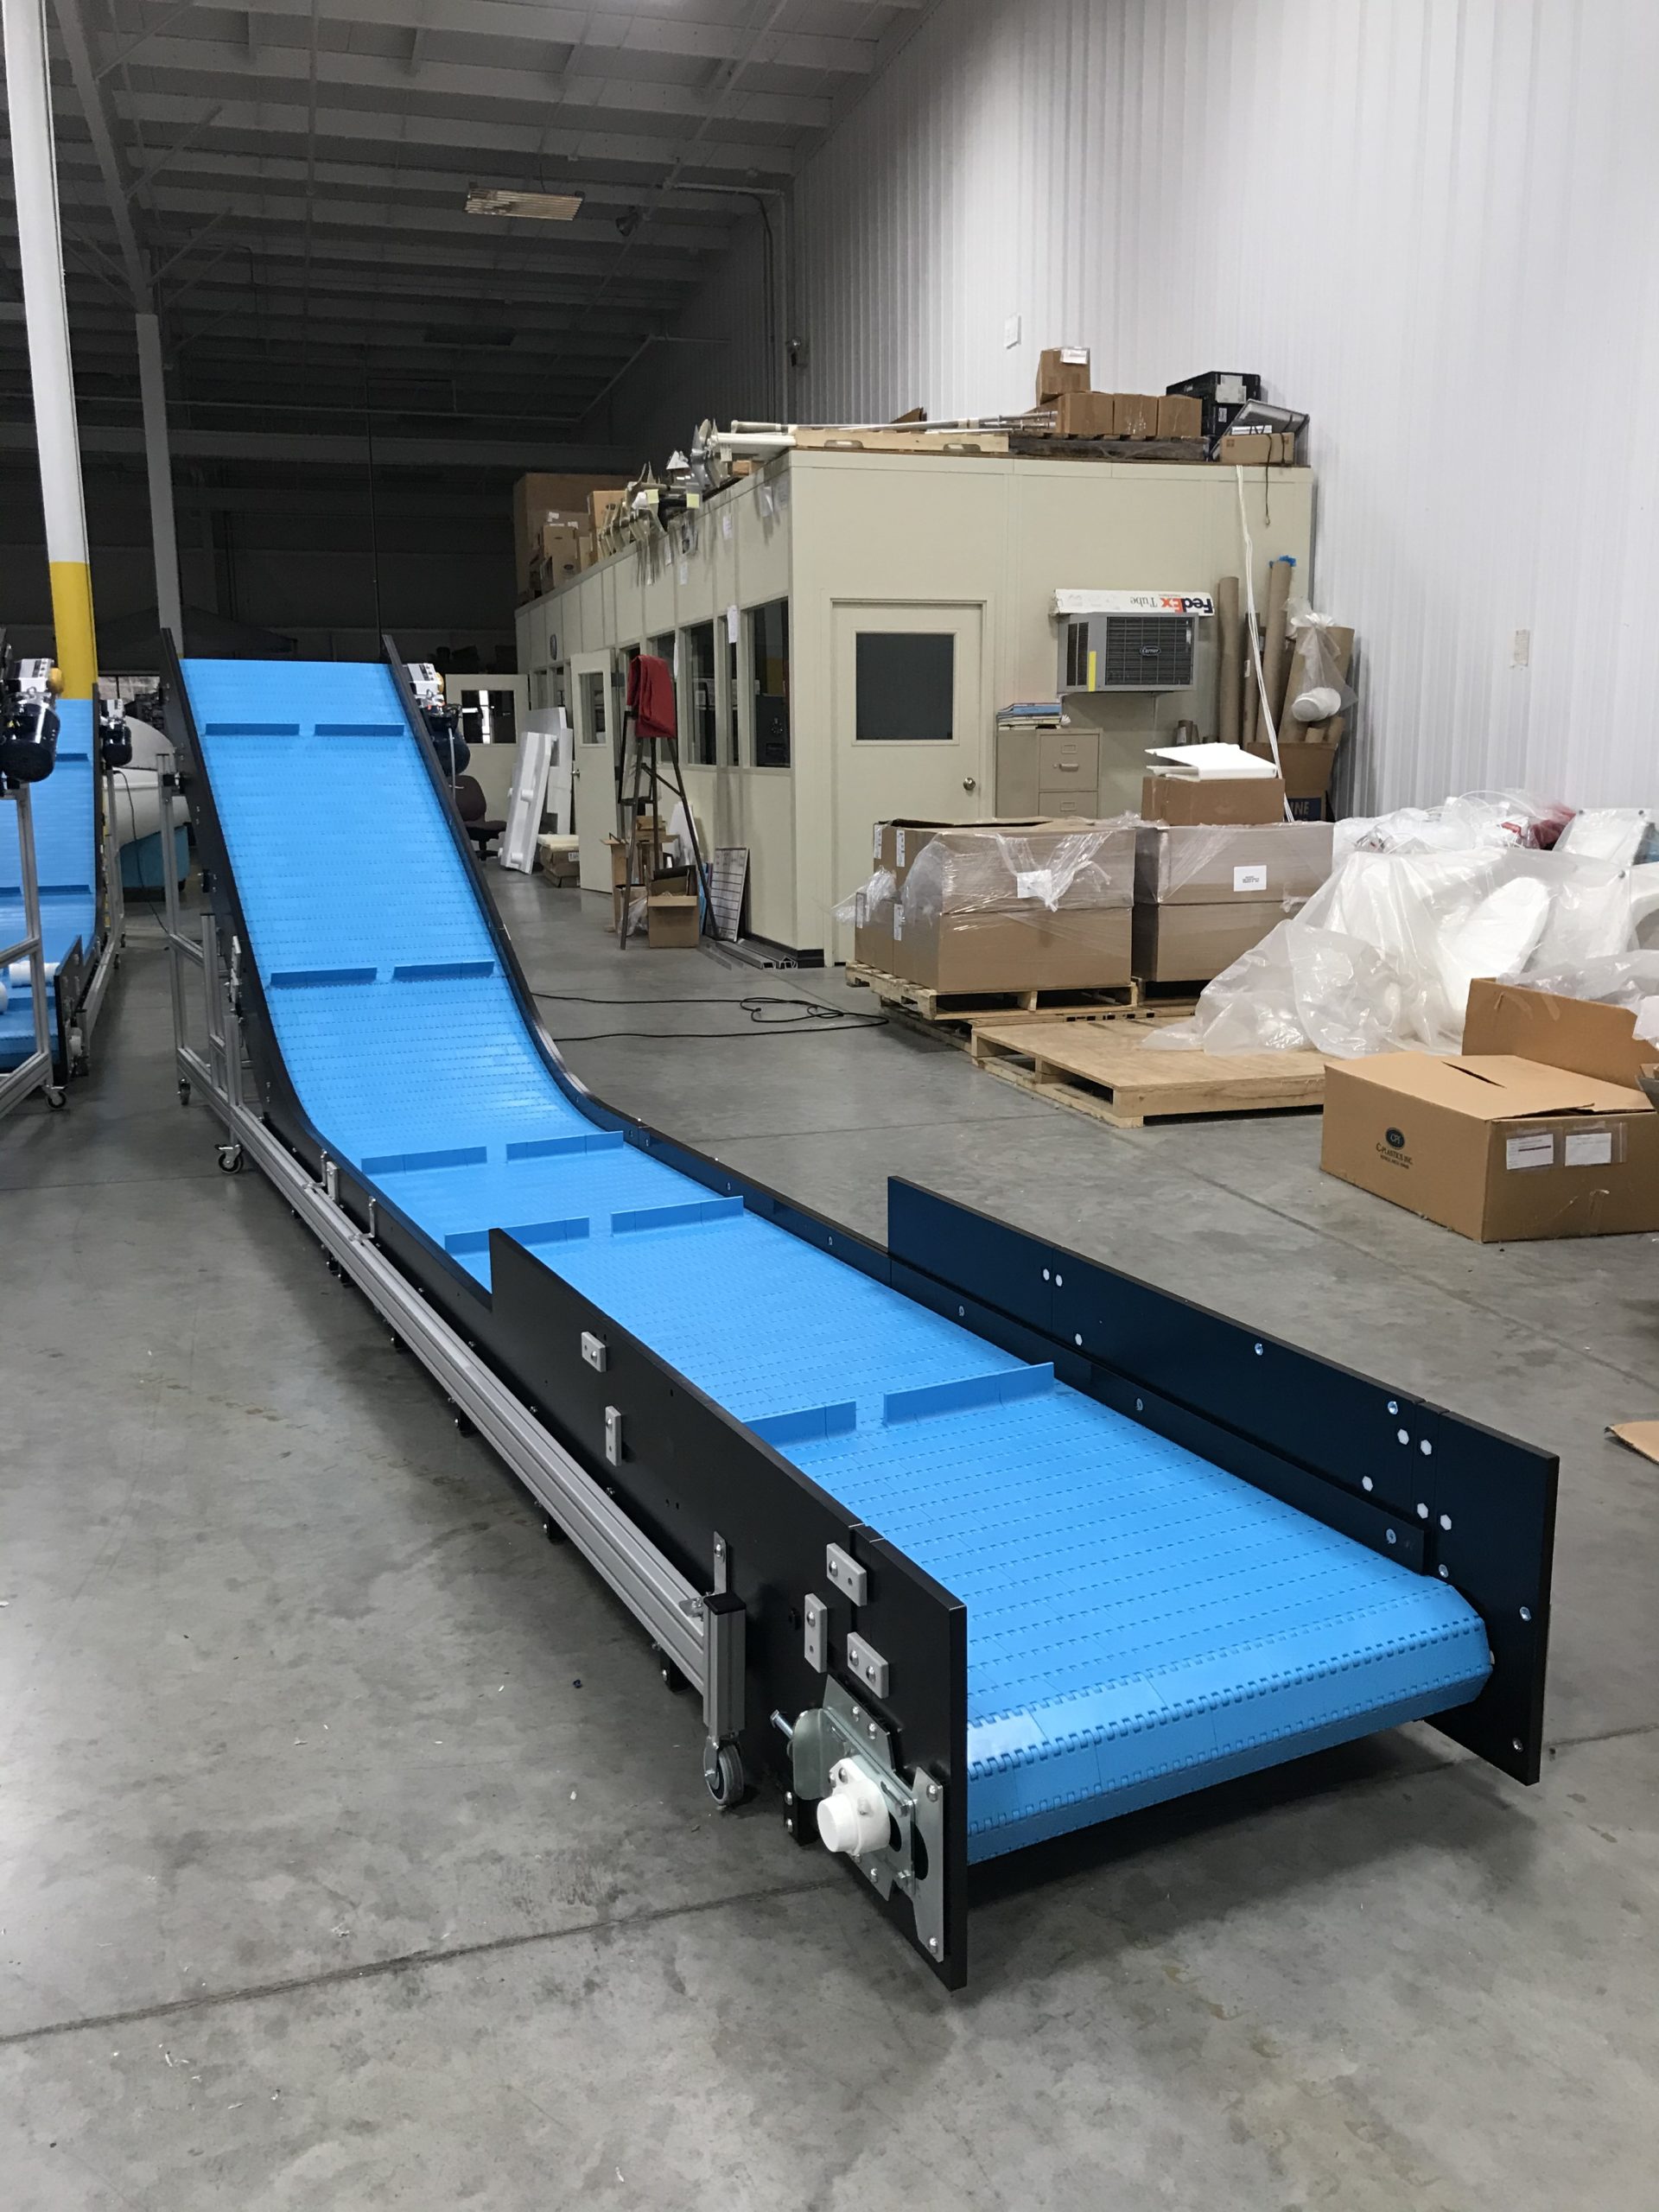 New High-Impact Conveyor Developed for Heavy Plastic Parts